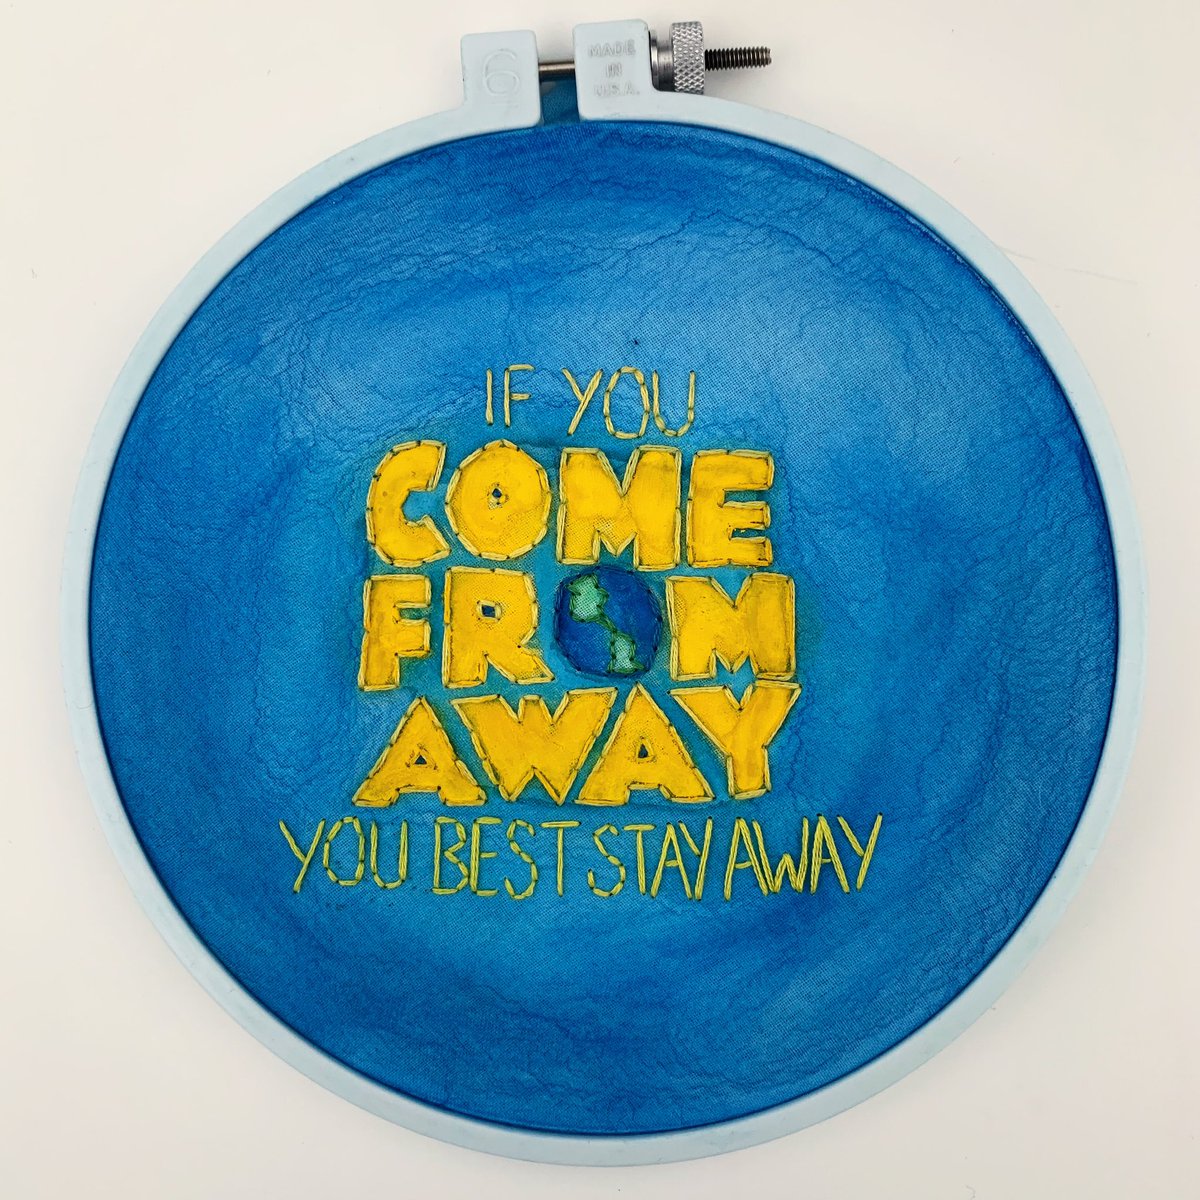 “If you come from away, you best stay away” - @Johnrockdoc 
(But like when the time is right please come back to explore The Rock!) 💛 @wecomefromaway #SocialDistancing #stayinyourbubble #covid #quarantine #welcometotherock #imanislander